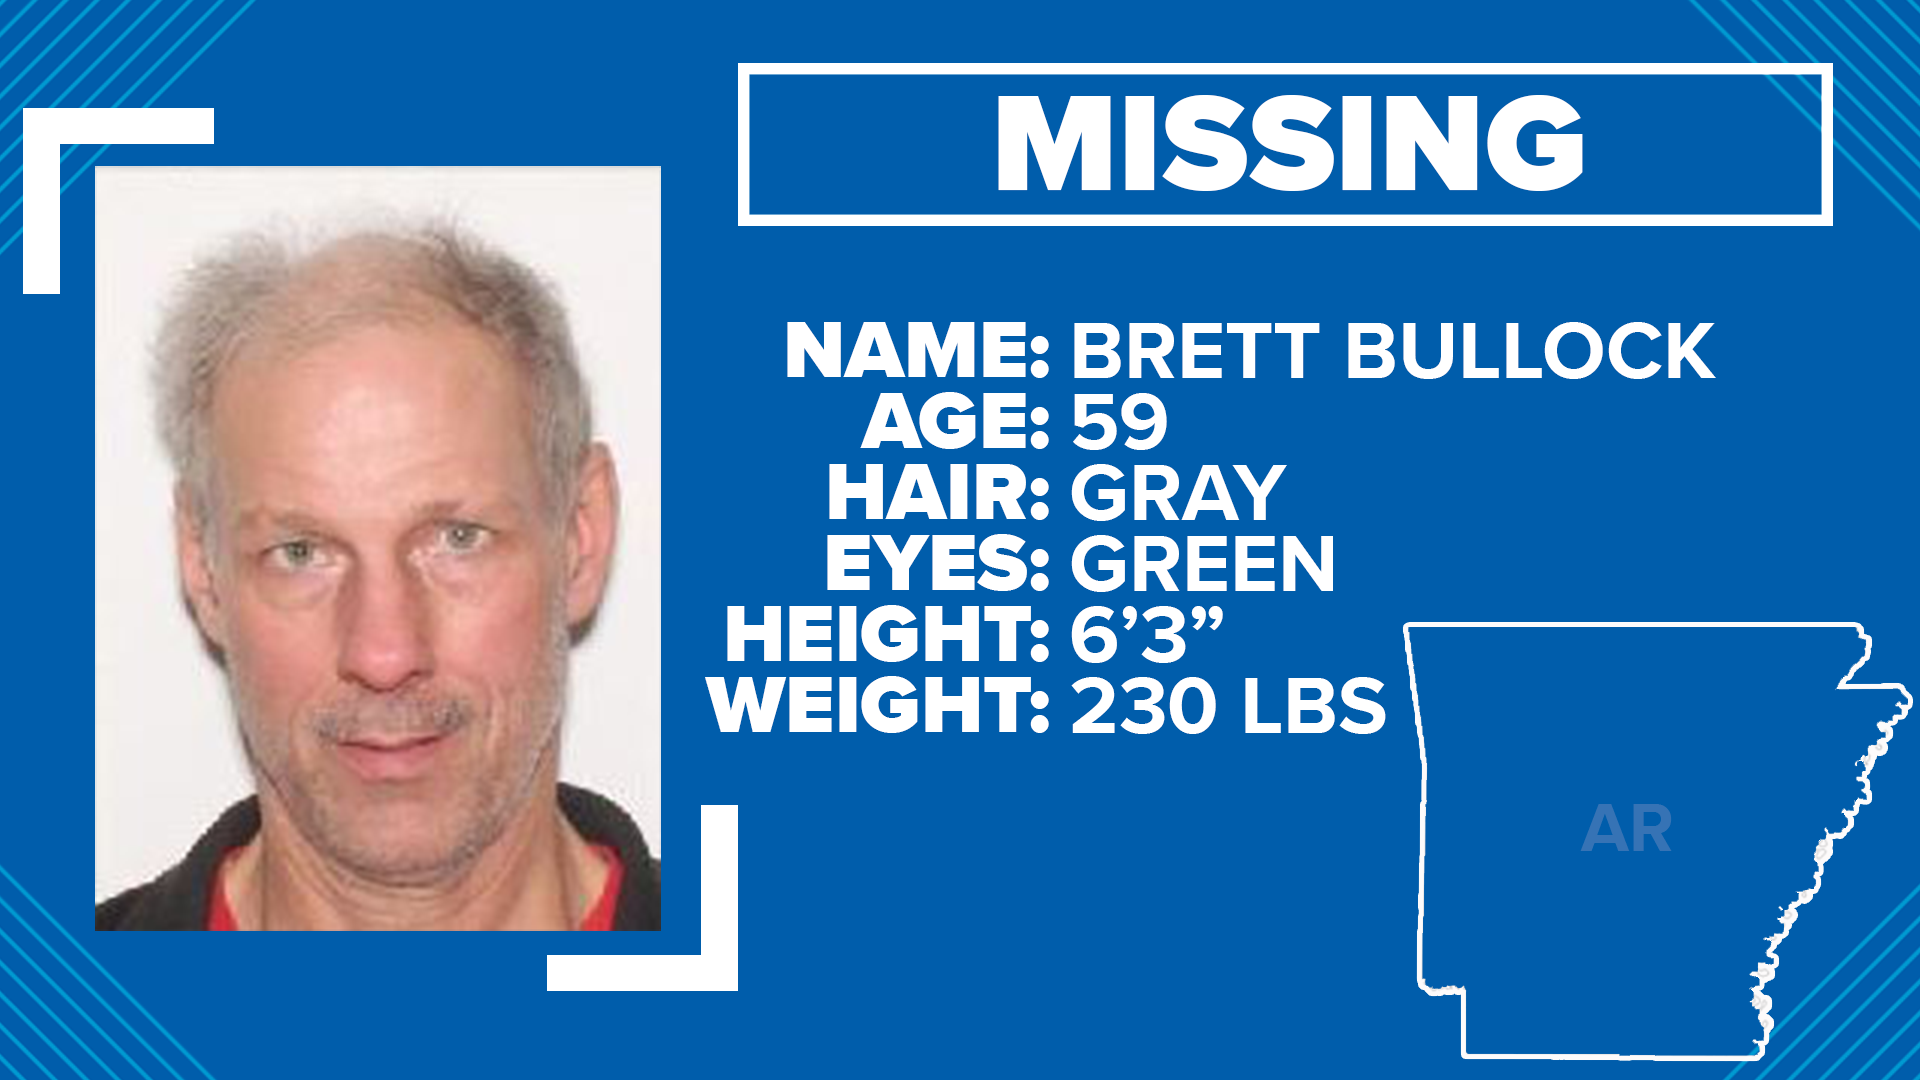 The Department of Veterans Affairs has requested activation of a Silver Alert for 59-year-old Brett Kevin Bullock.